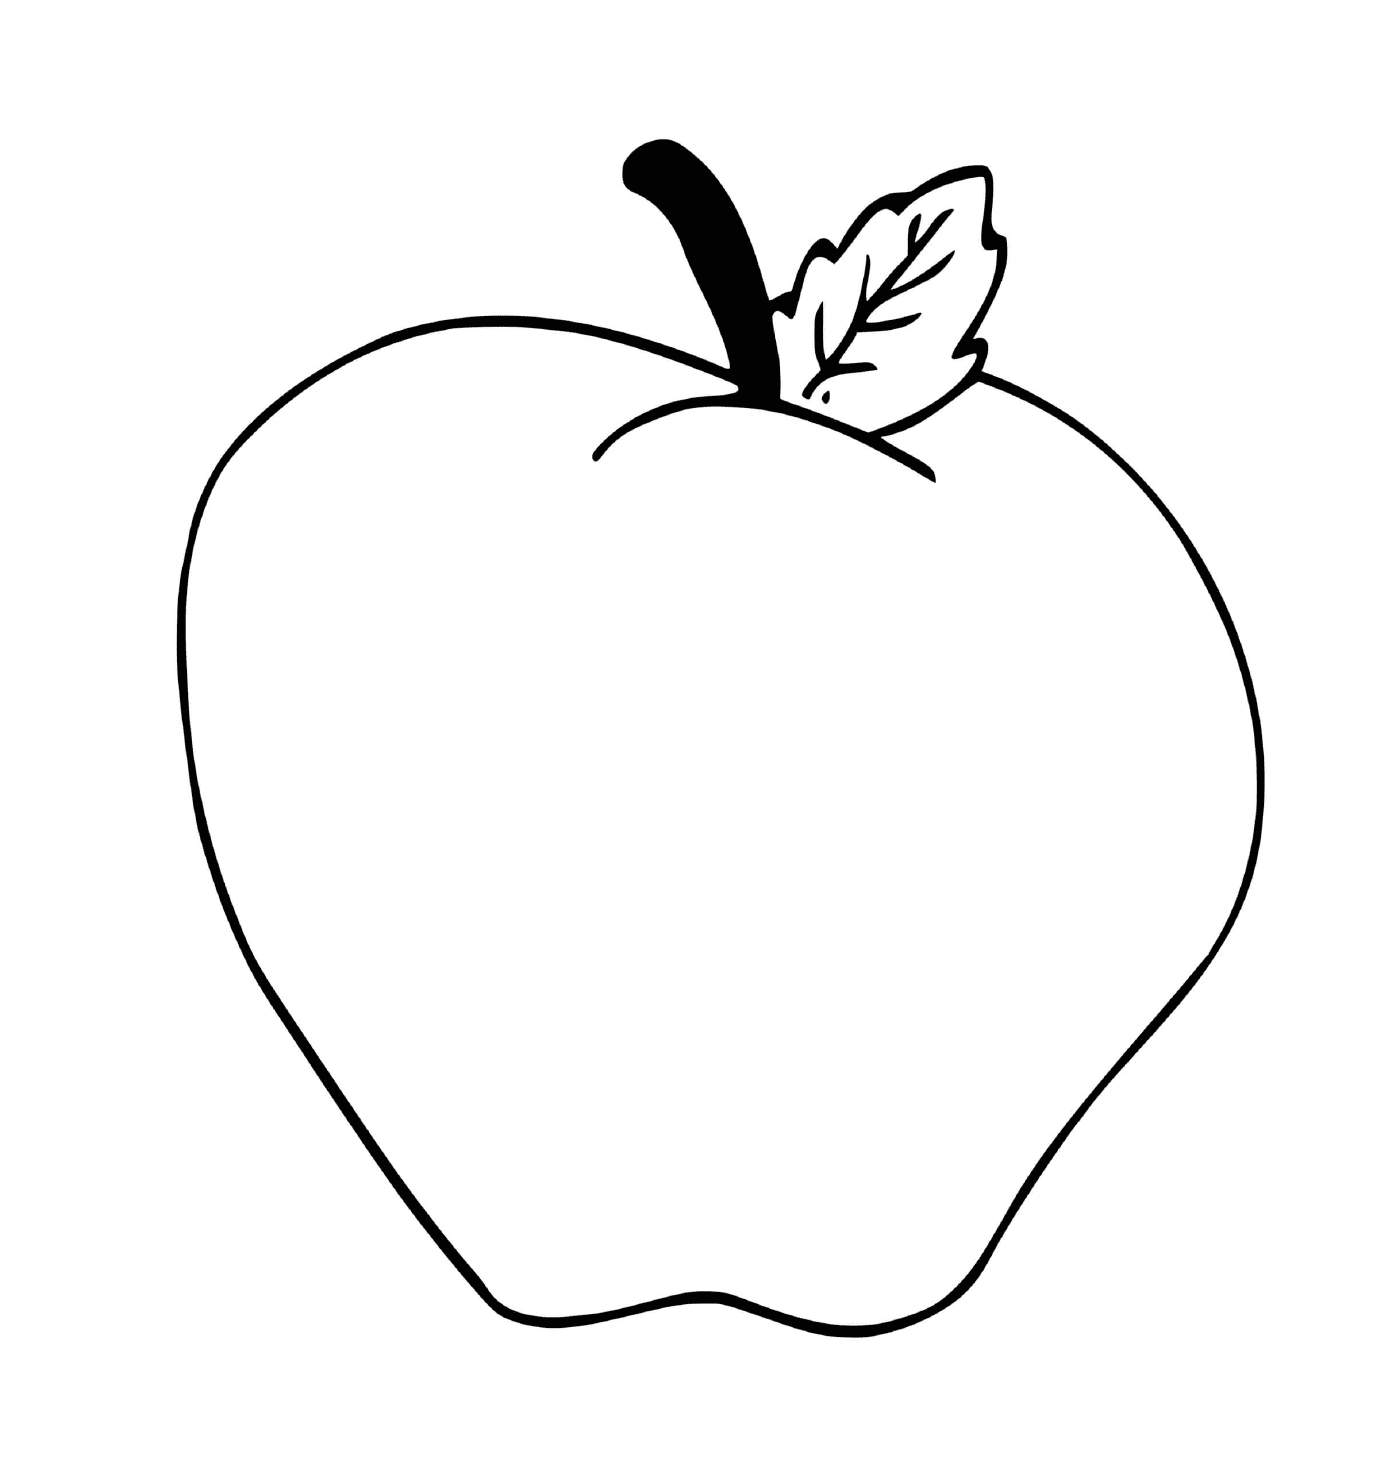  Simple and easy apple 